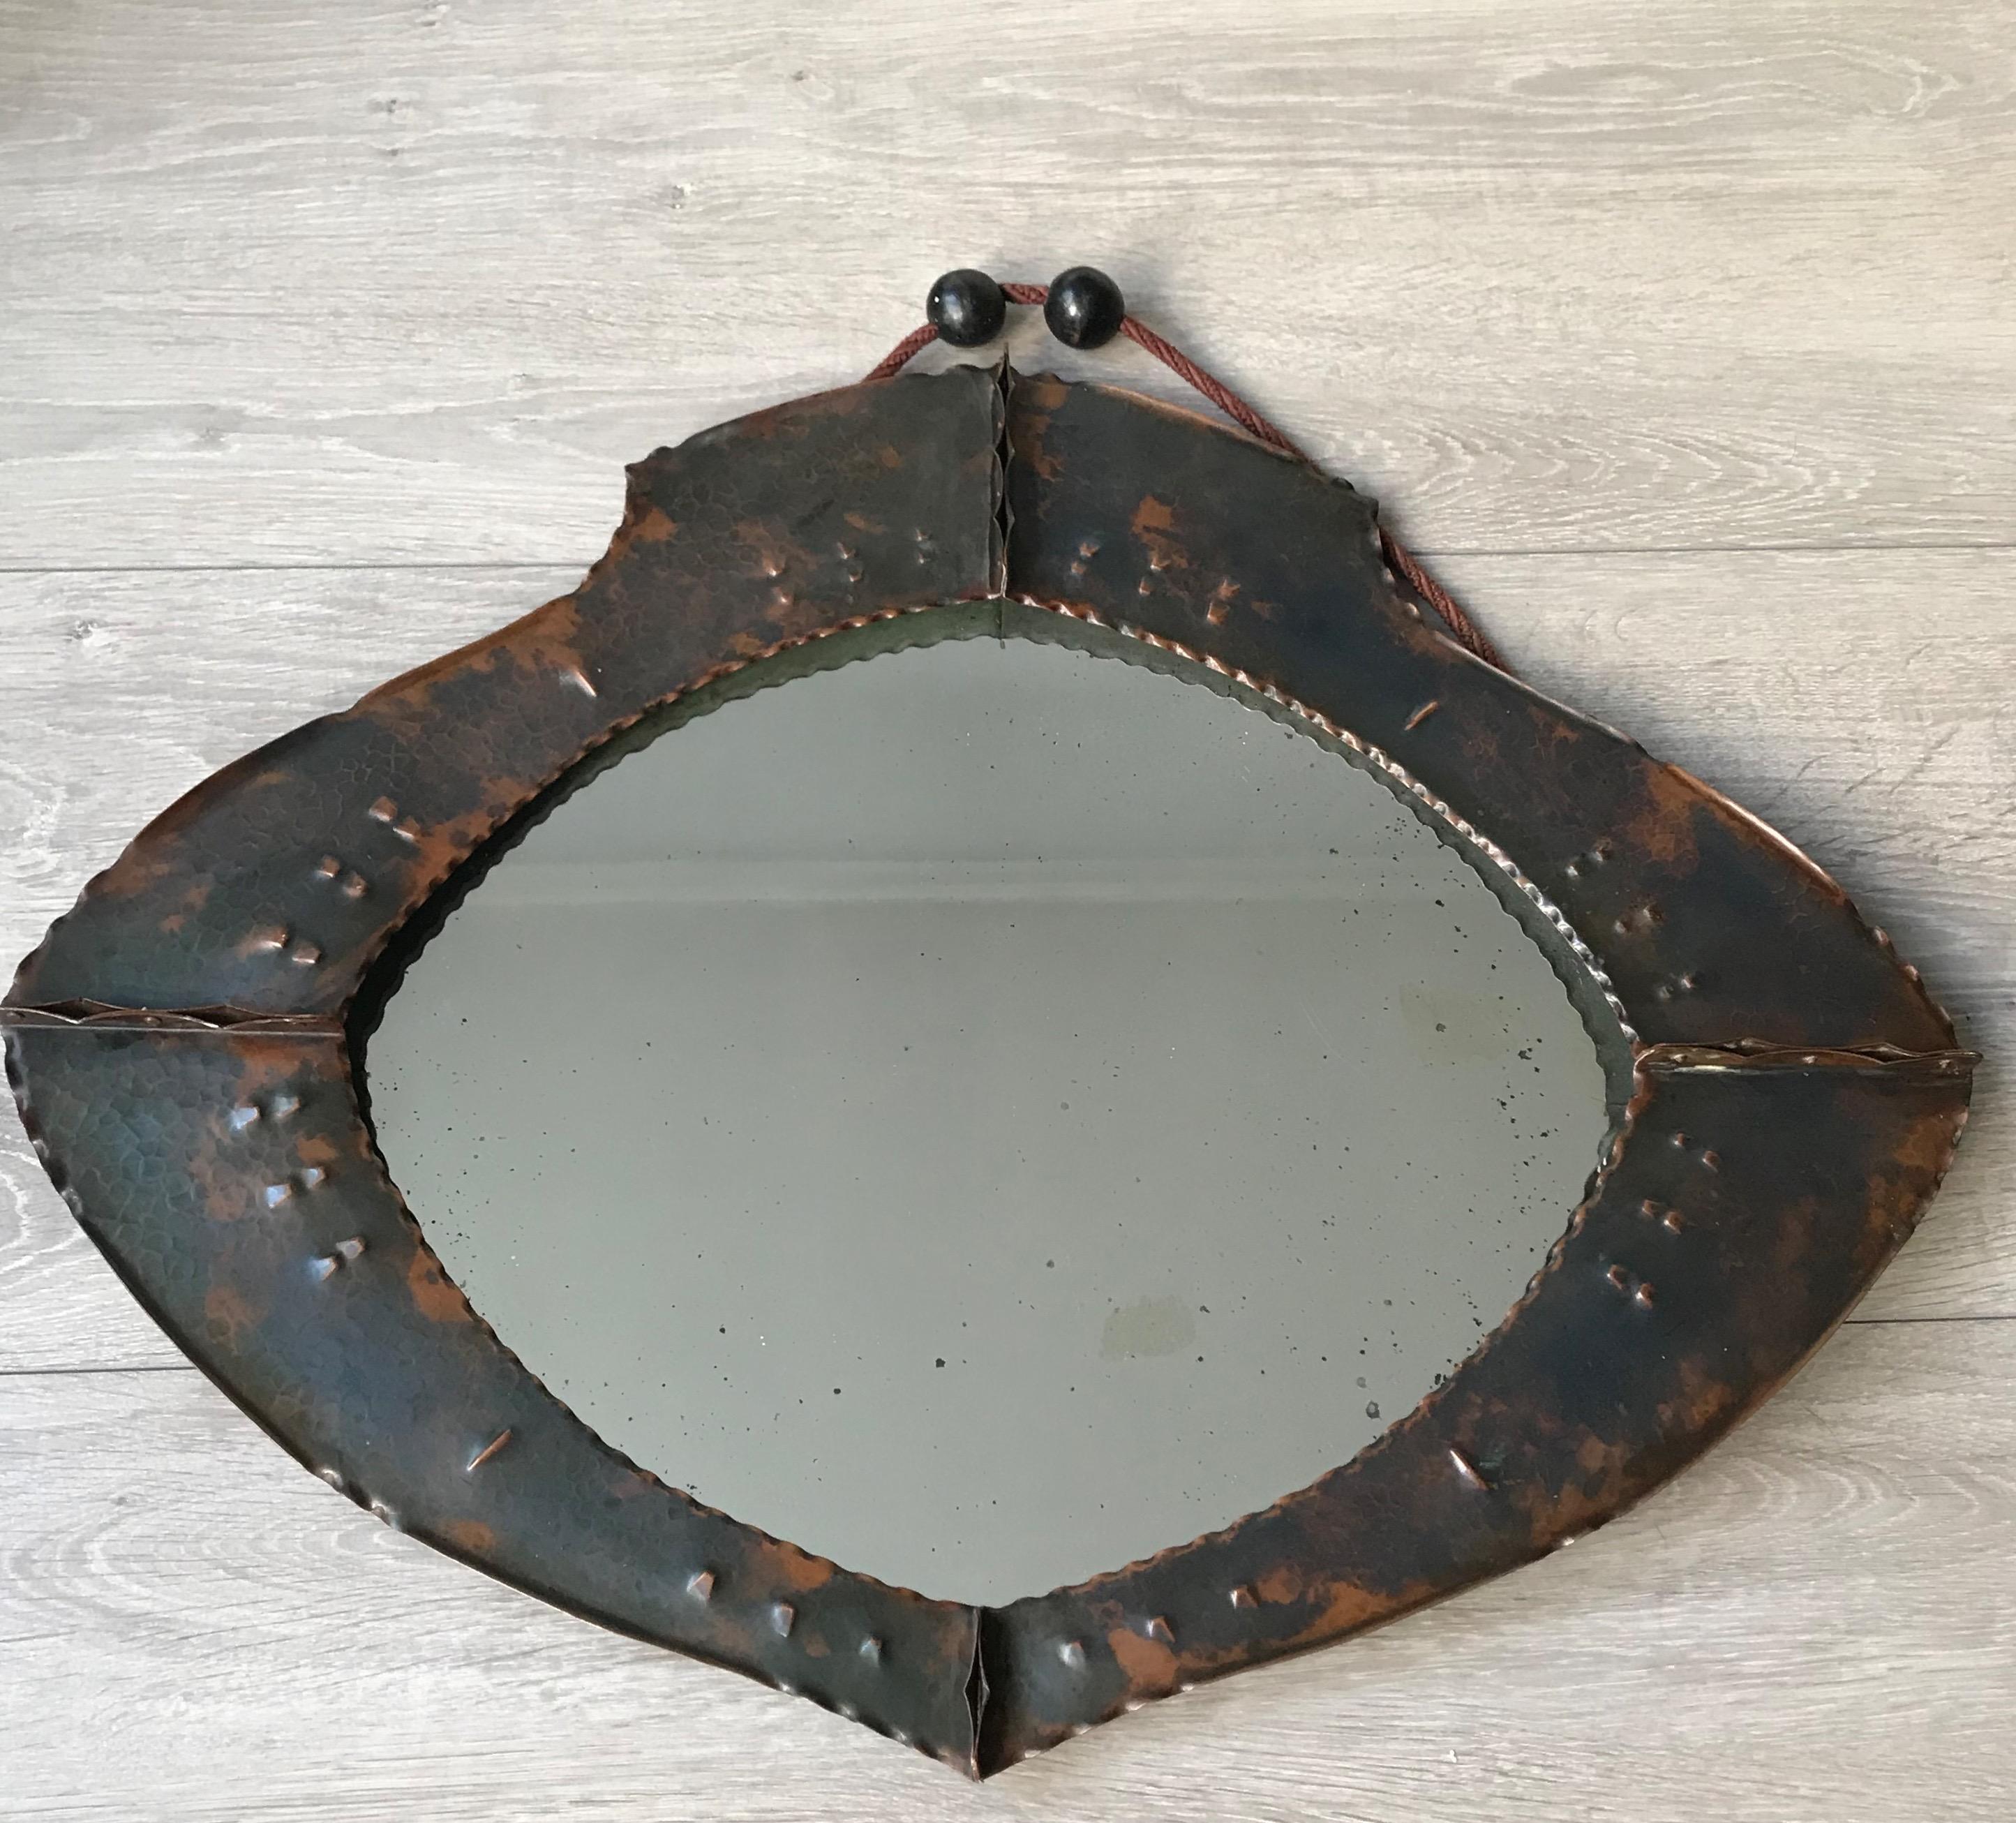 Early 1900s artistic design Arts & Crafts mirror with a crustacean look and feel.

This all-handcrafted, wide shape Arts & Crafts antique with its original, thick glass mirror is an absolute joy to own and look at. The perfectly symmetrical design